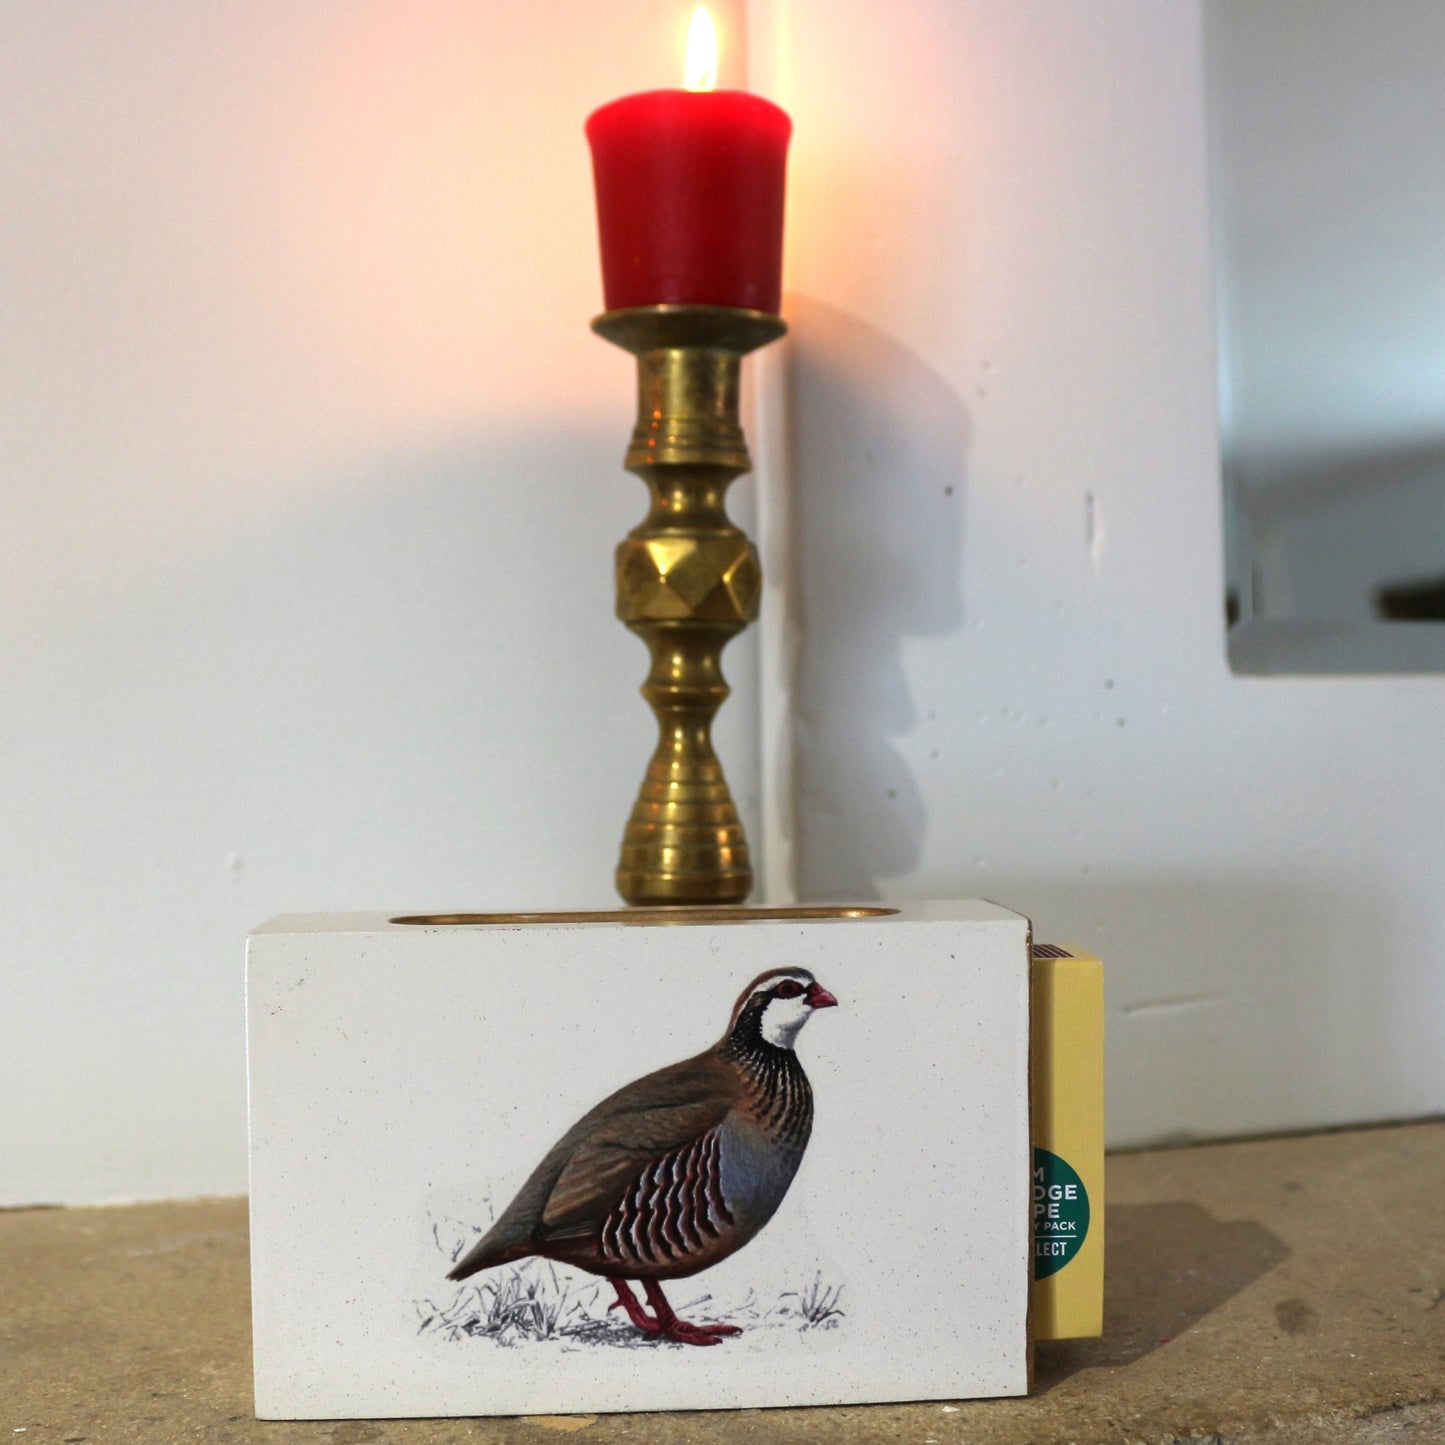 Standard Wooden Matchbox Cover with Matches: Partridge